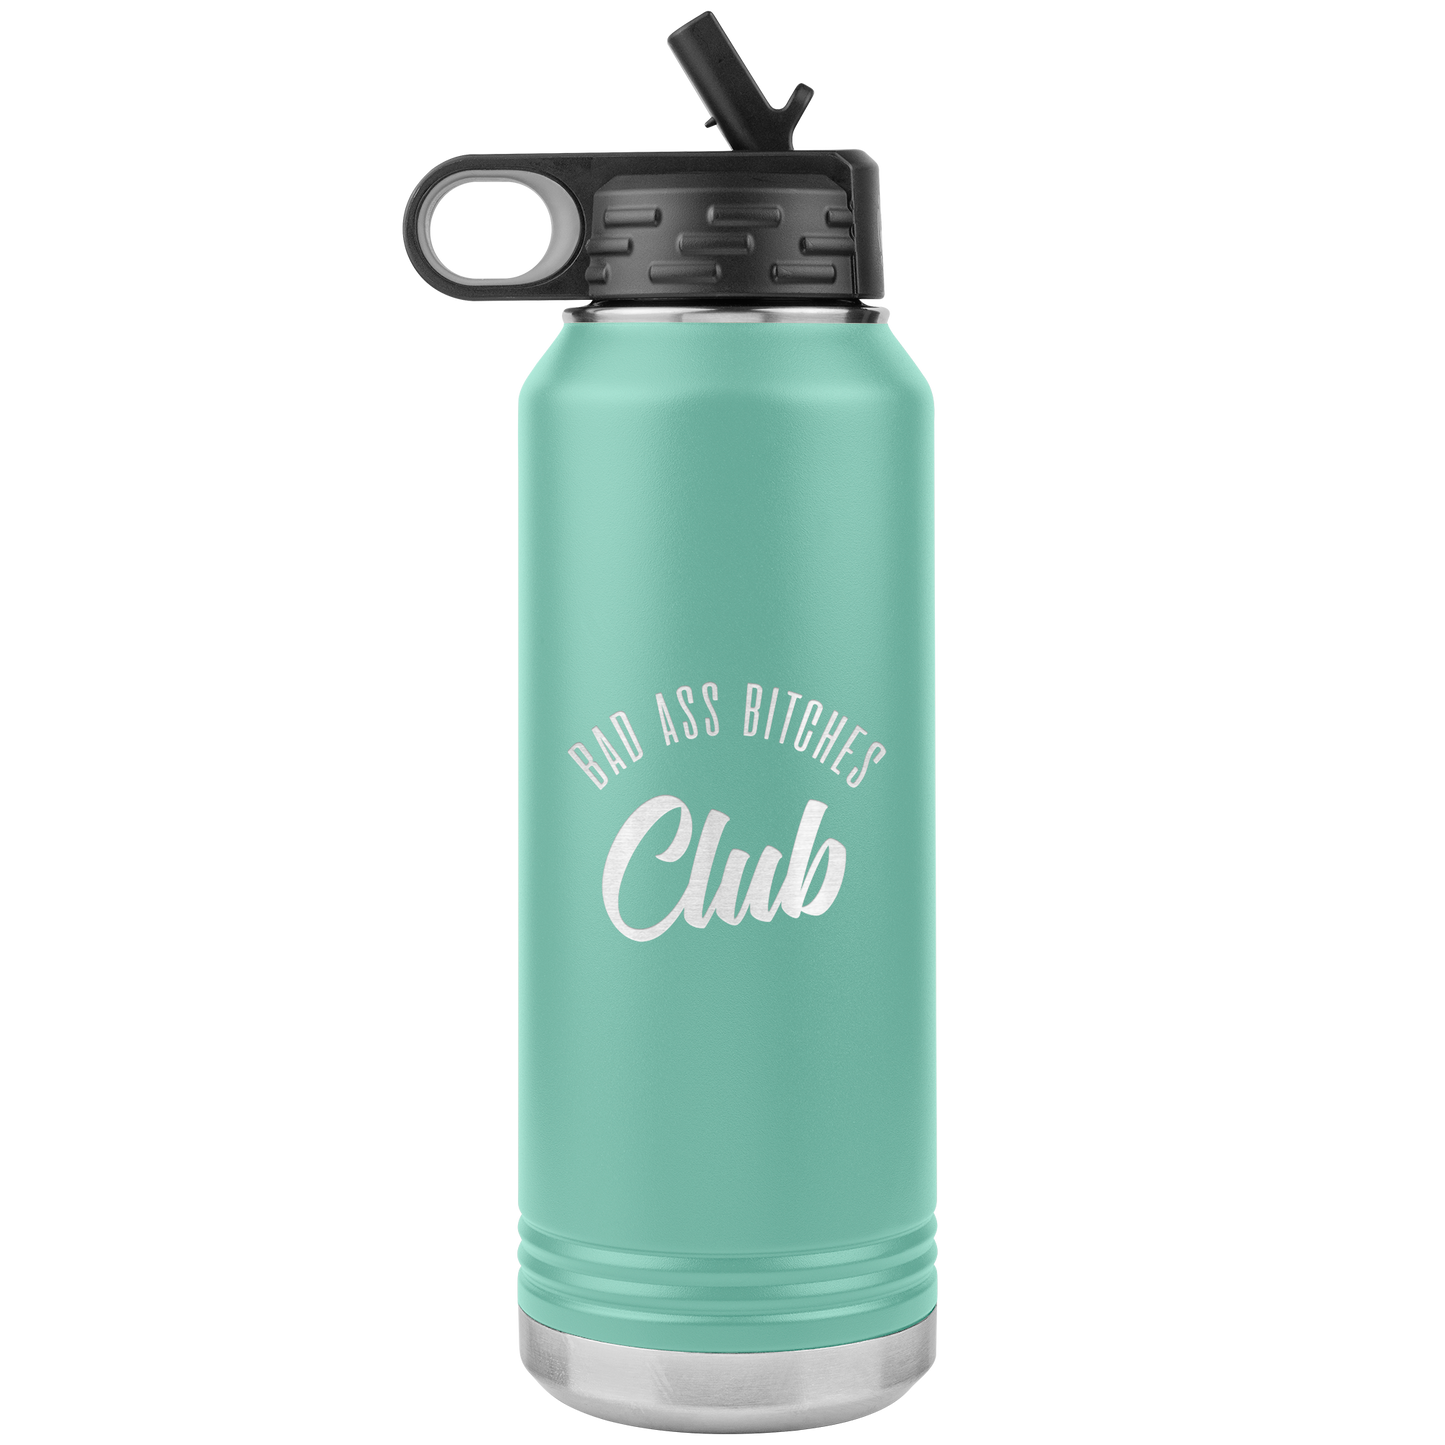 BAD ASS BITCHES CLUB 32 OZ WATER BOTTLE